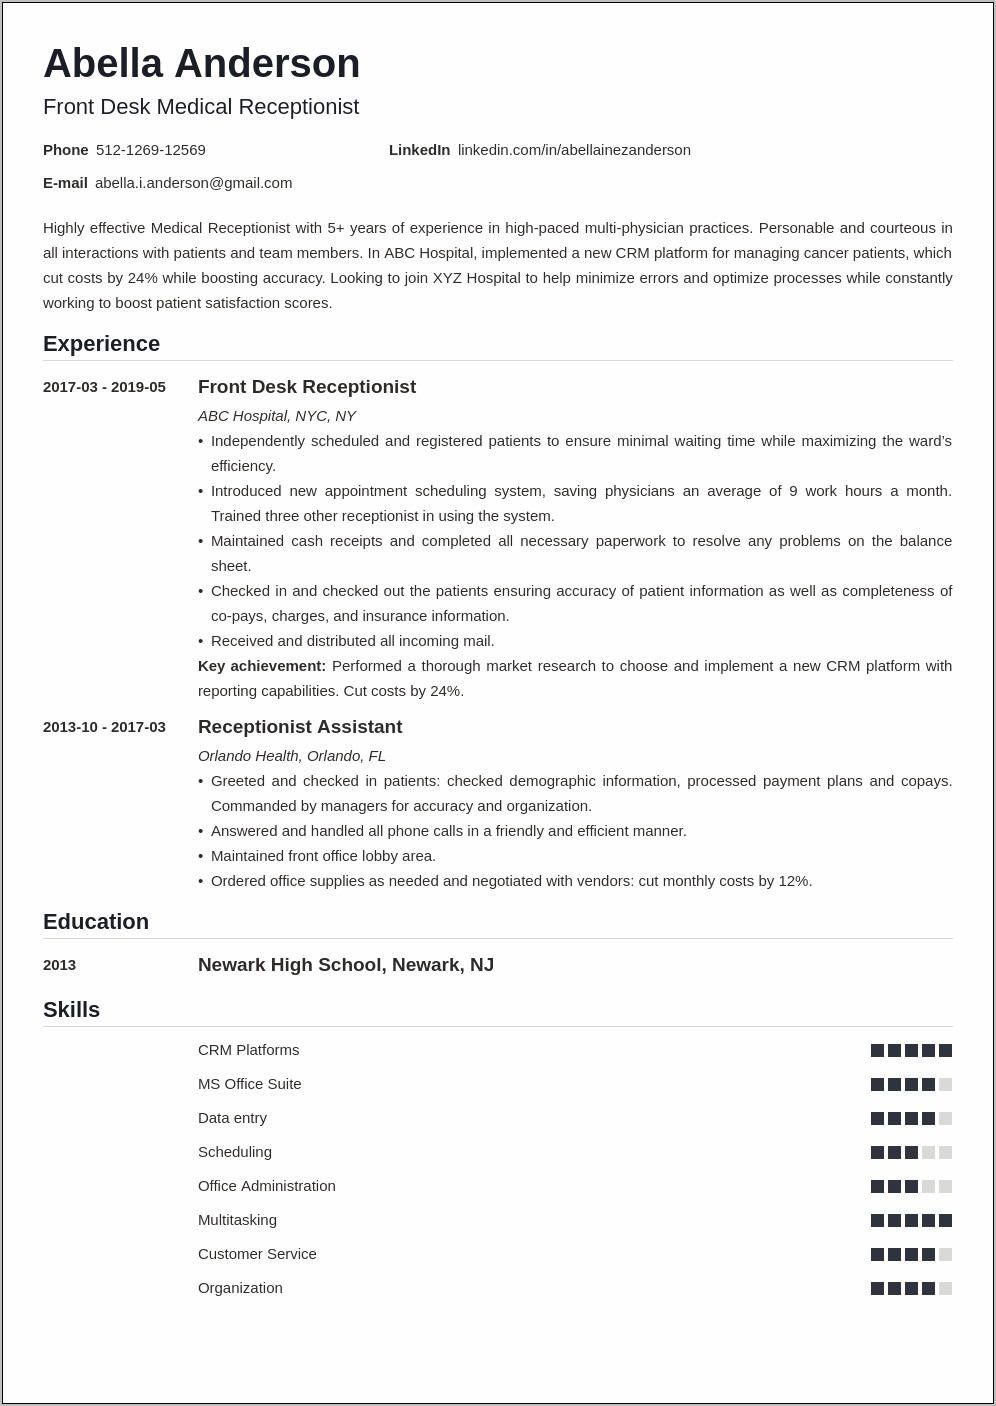 Front Office Resume Objective Example